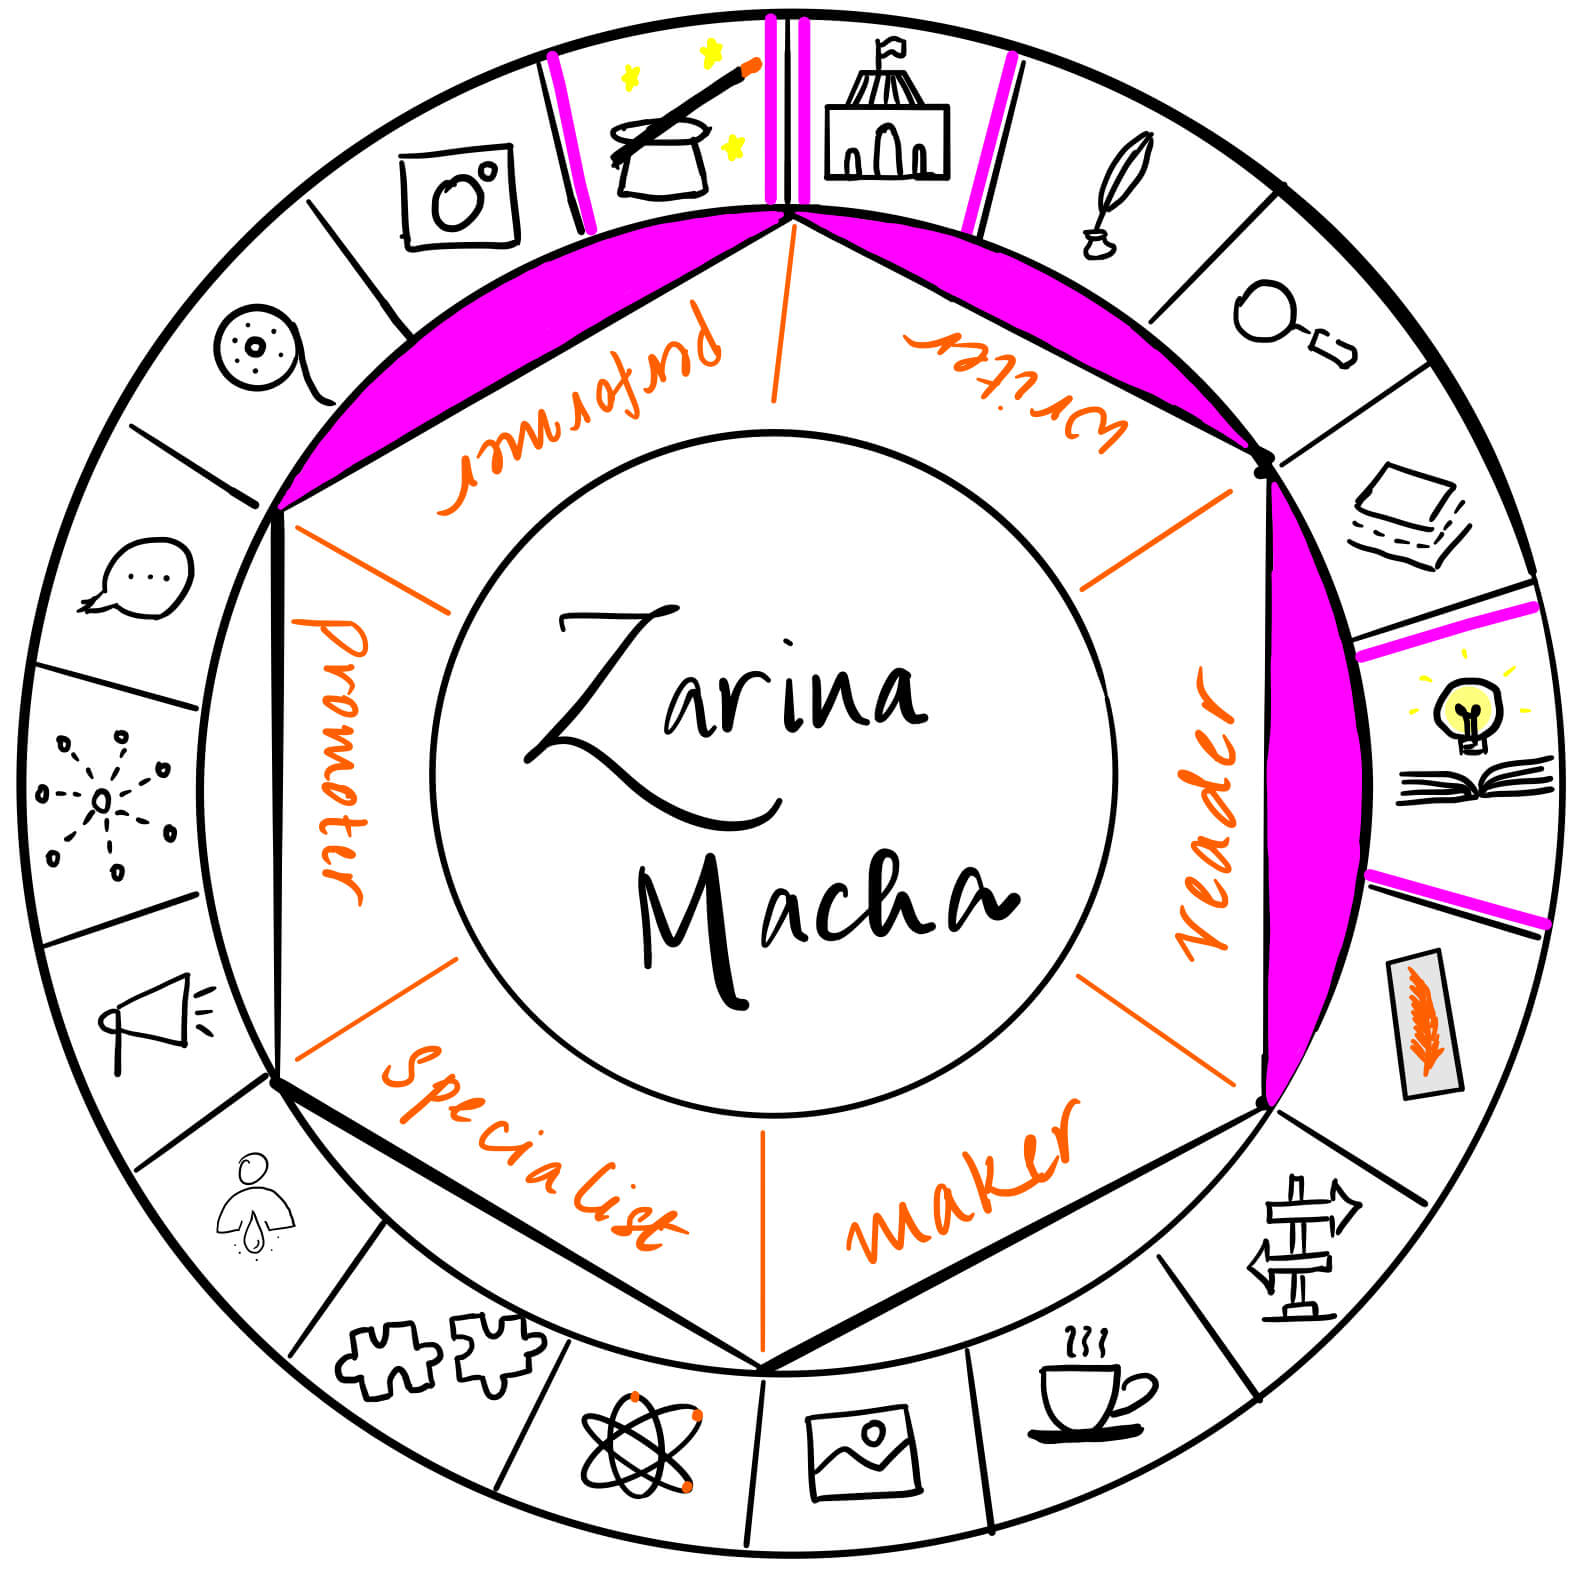 Zarina Macha is a writer, reader and performer. It's a pleasure to have her over on The Creator's Roulette to talk about the power of networking and connections.